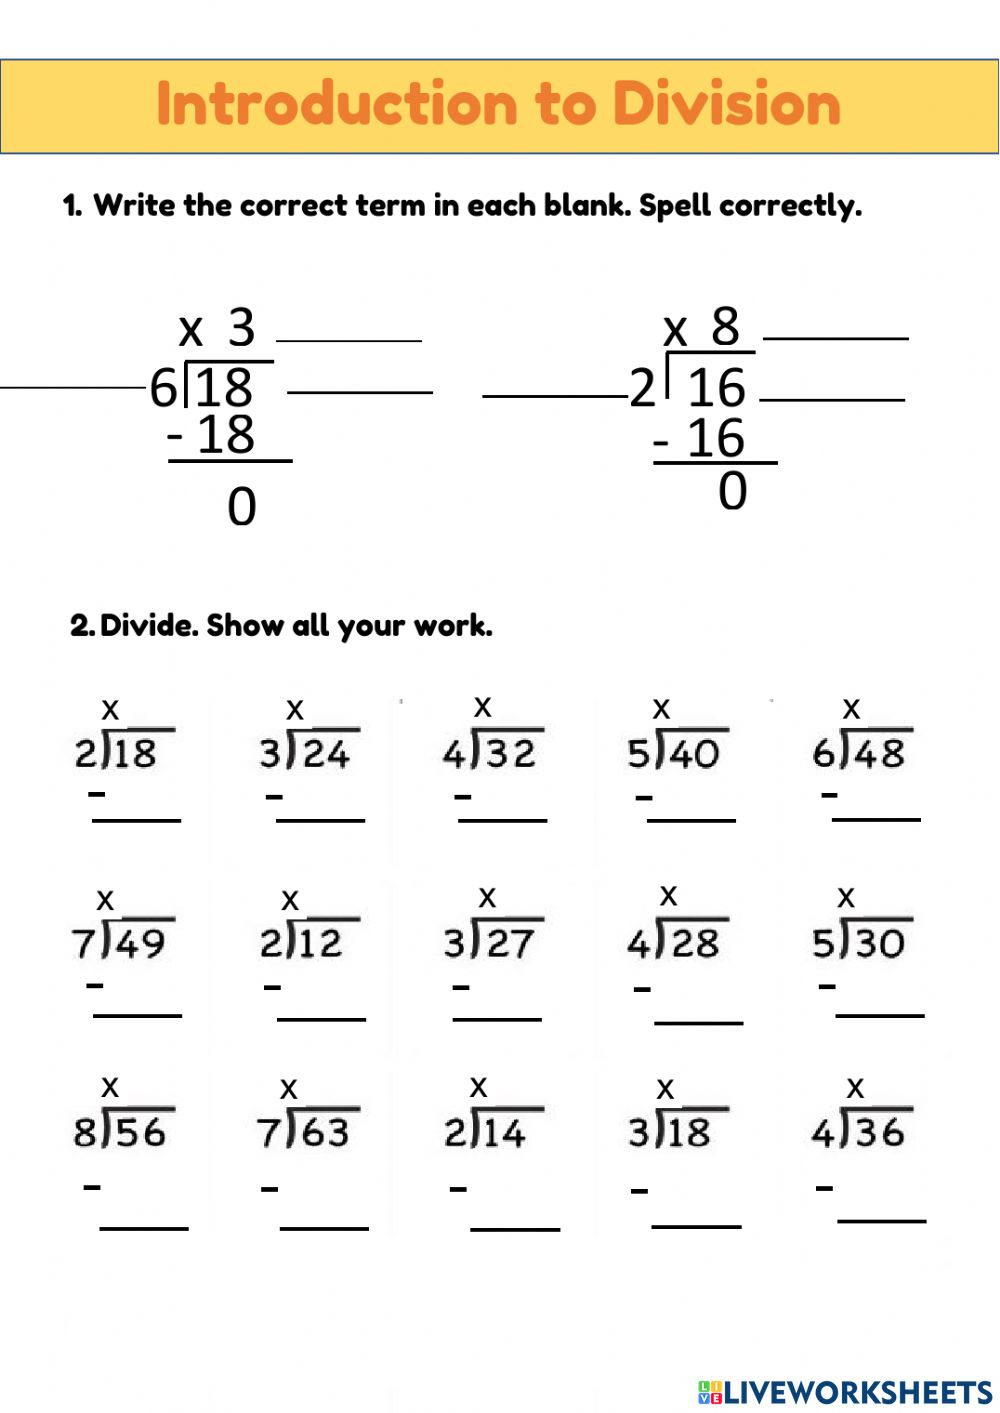 Introduction To Division Math Worksheet By Smartboard Smarty Tpt